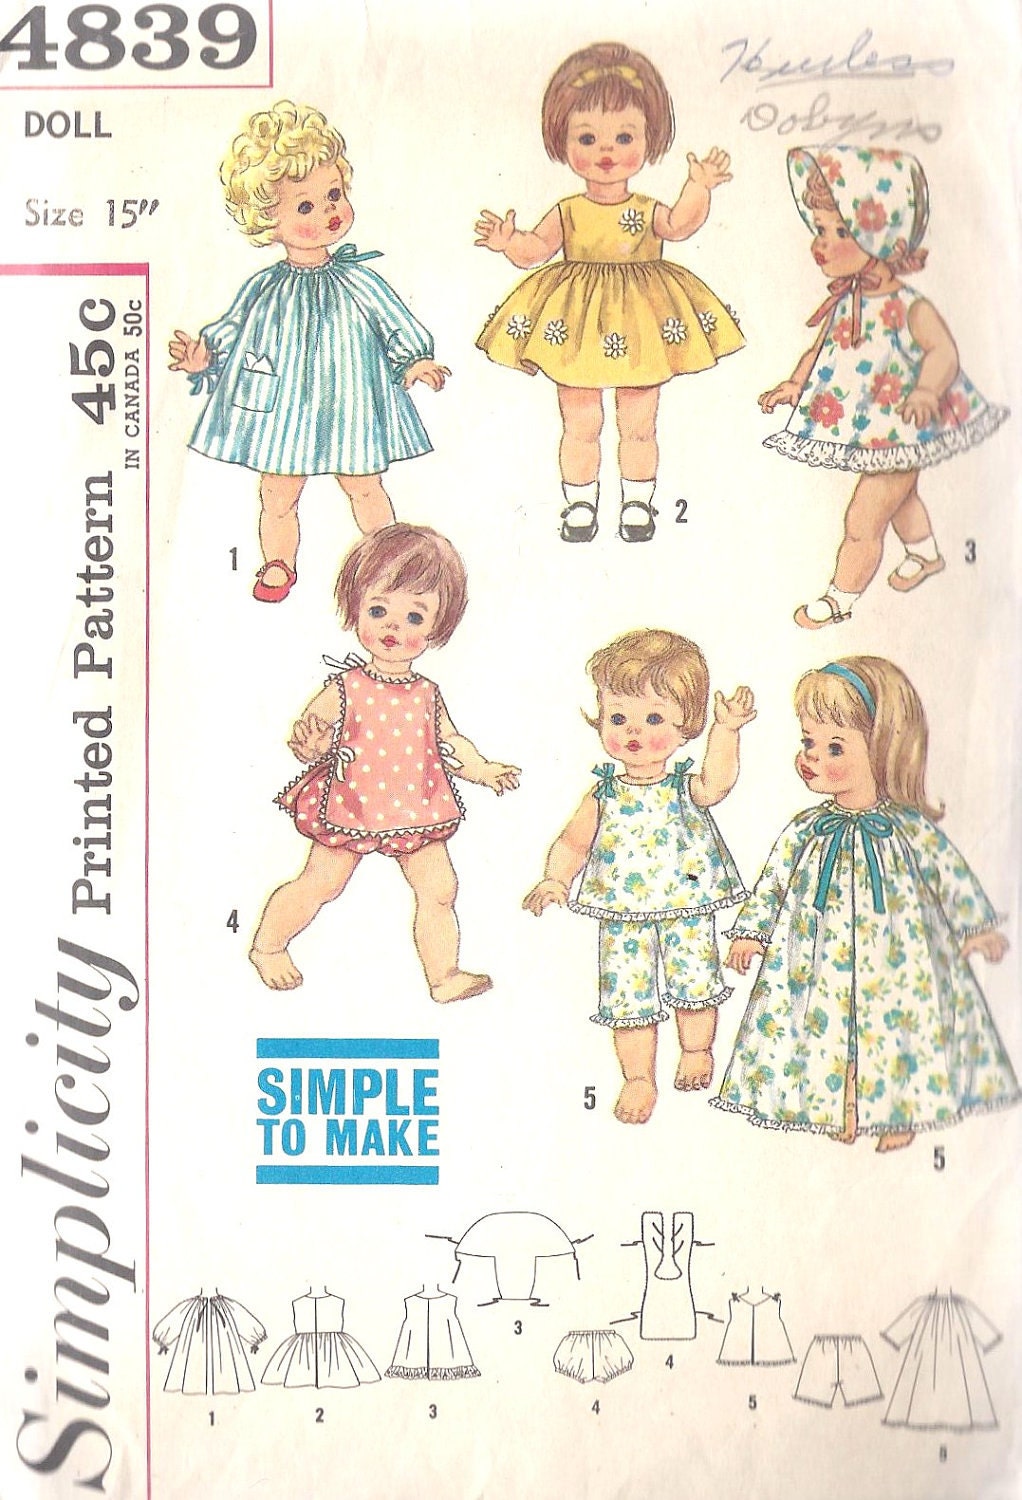 1960s15 inch Doll Tiny Chatty Baby Clothing Wardrobe Vintage Sewing Pattern Simplicity 4839